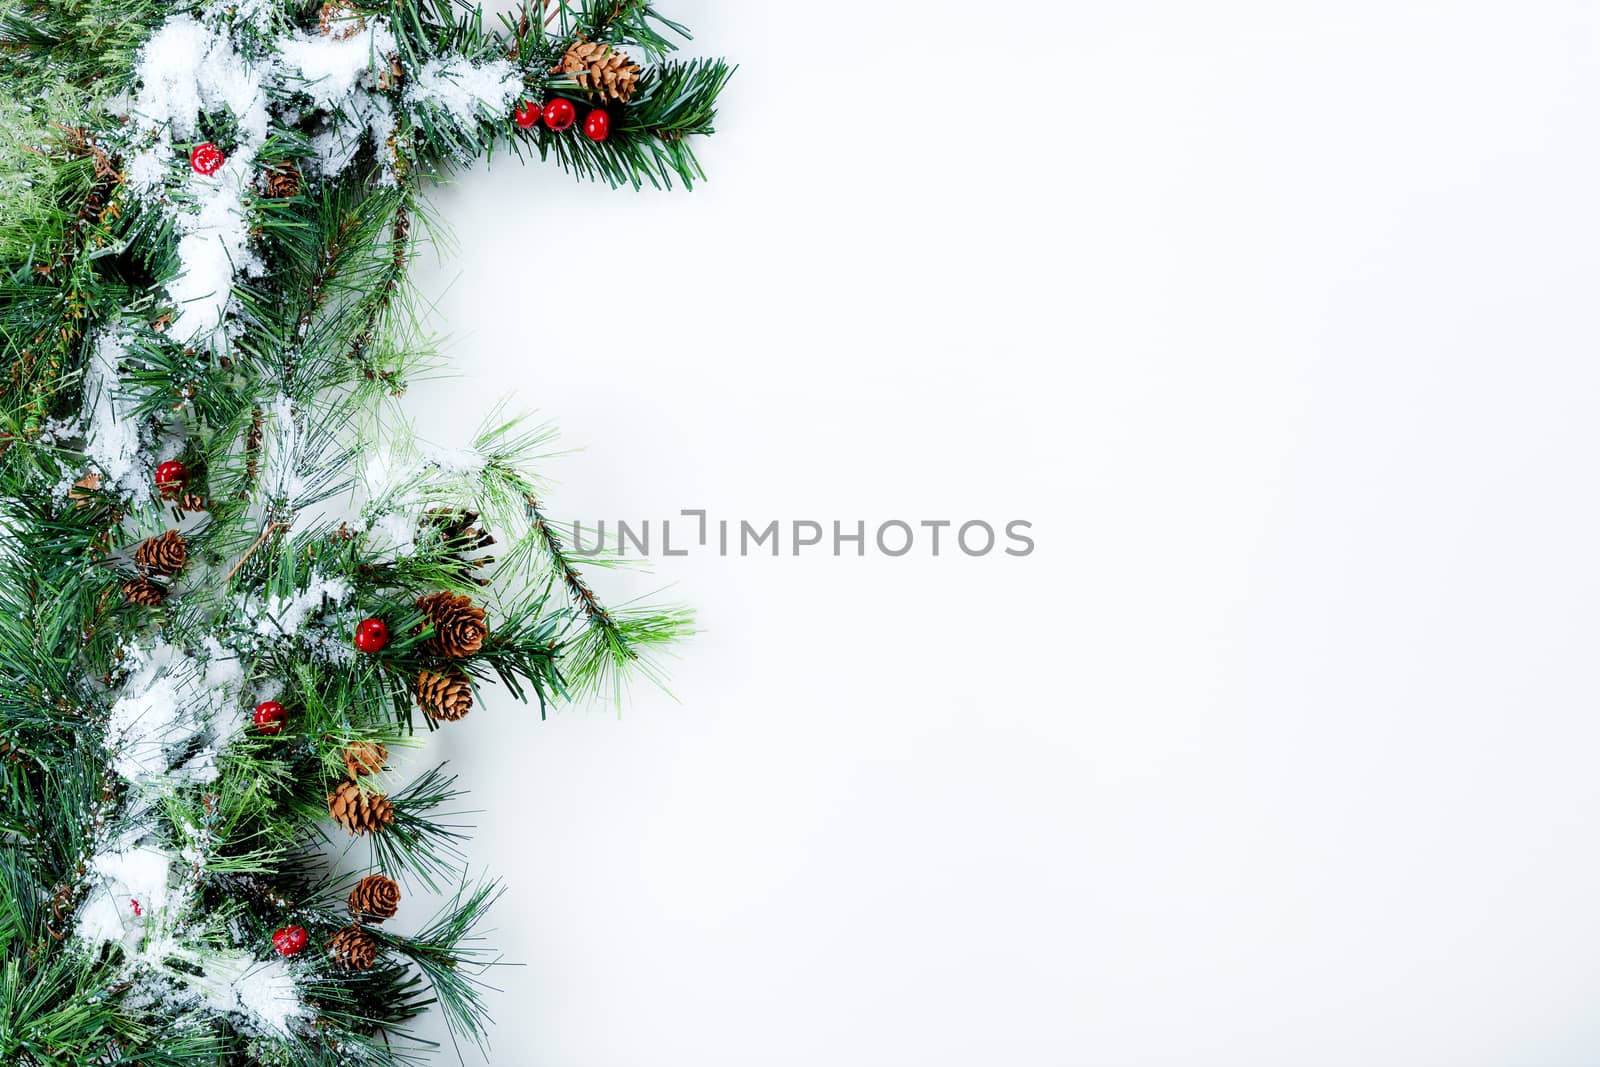 Snow on Christmas tree evergreen branches on left border of a white background  